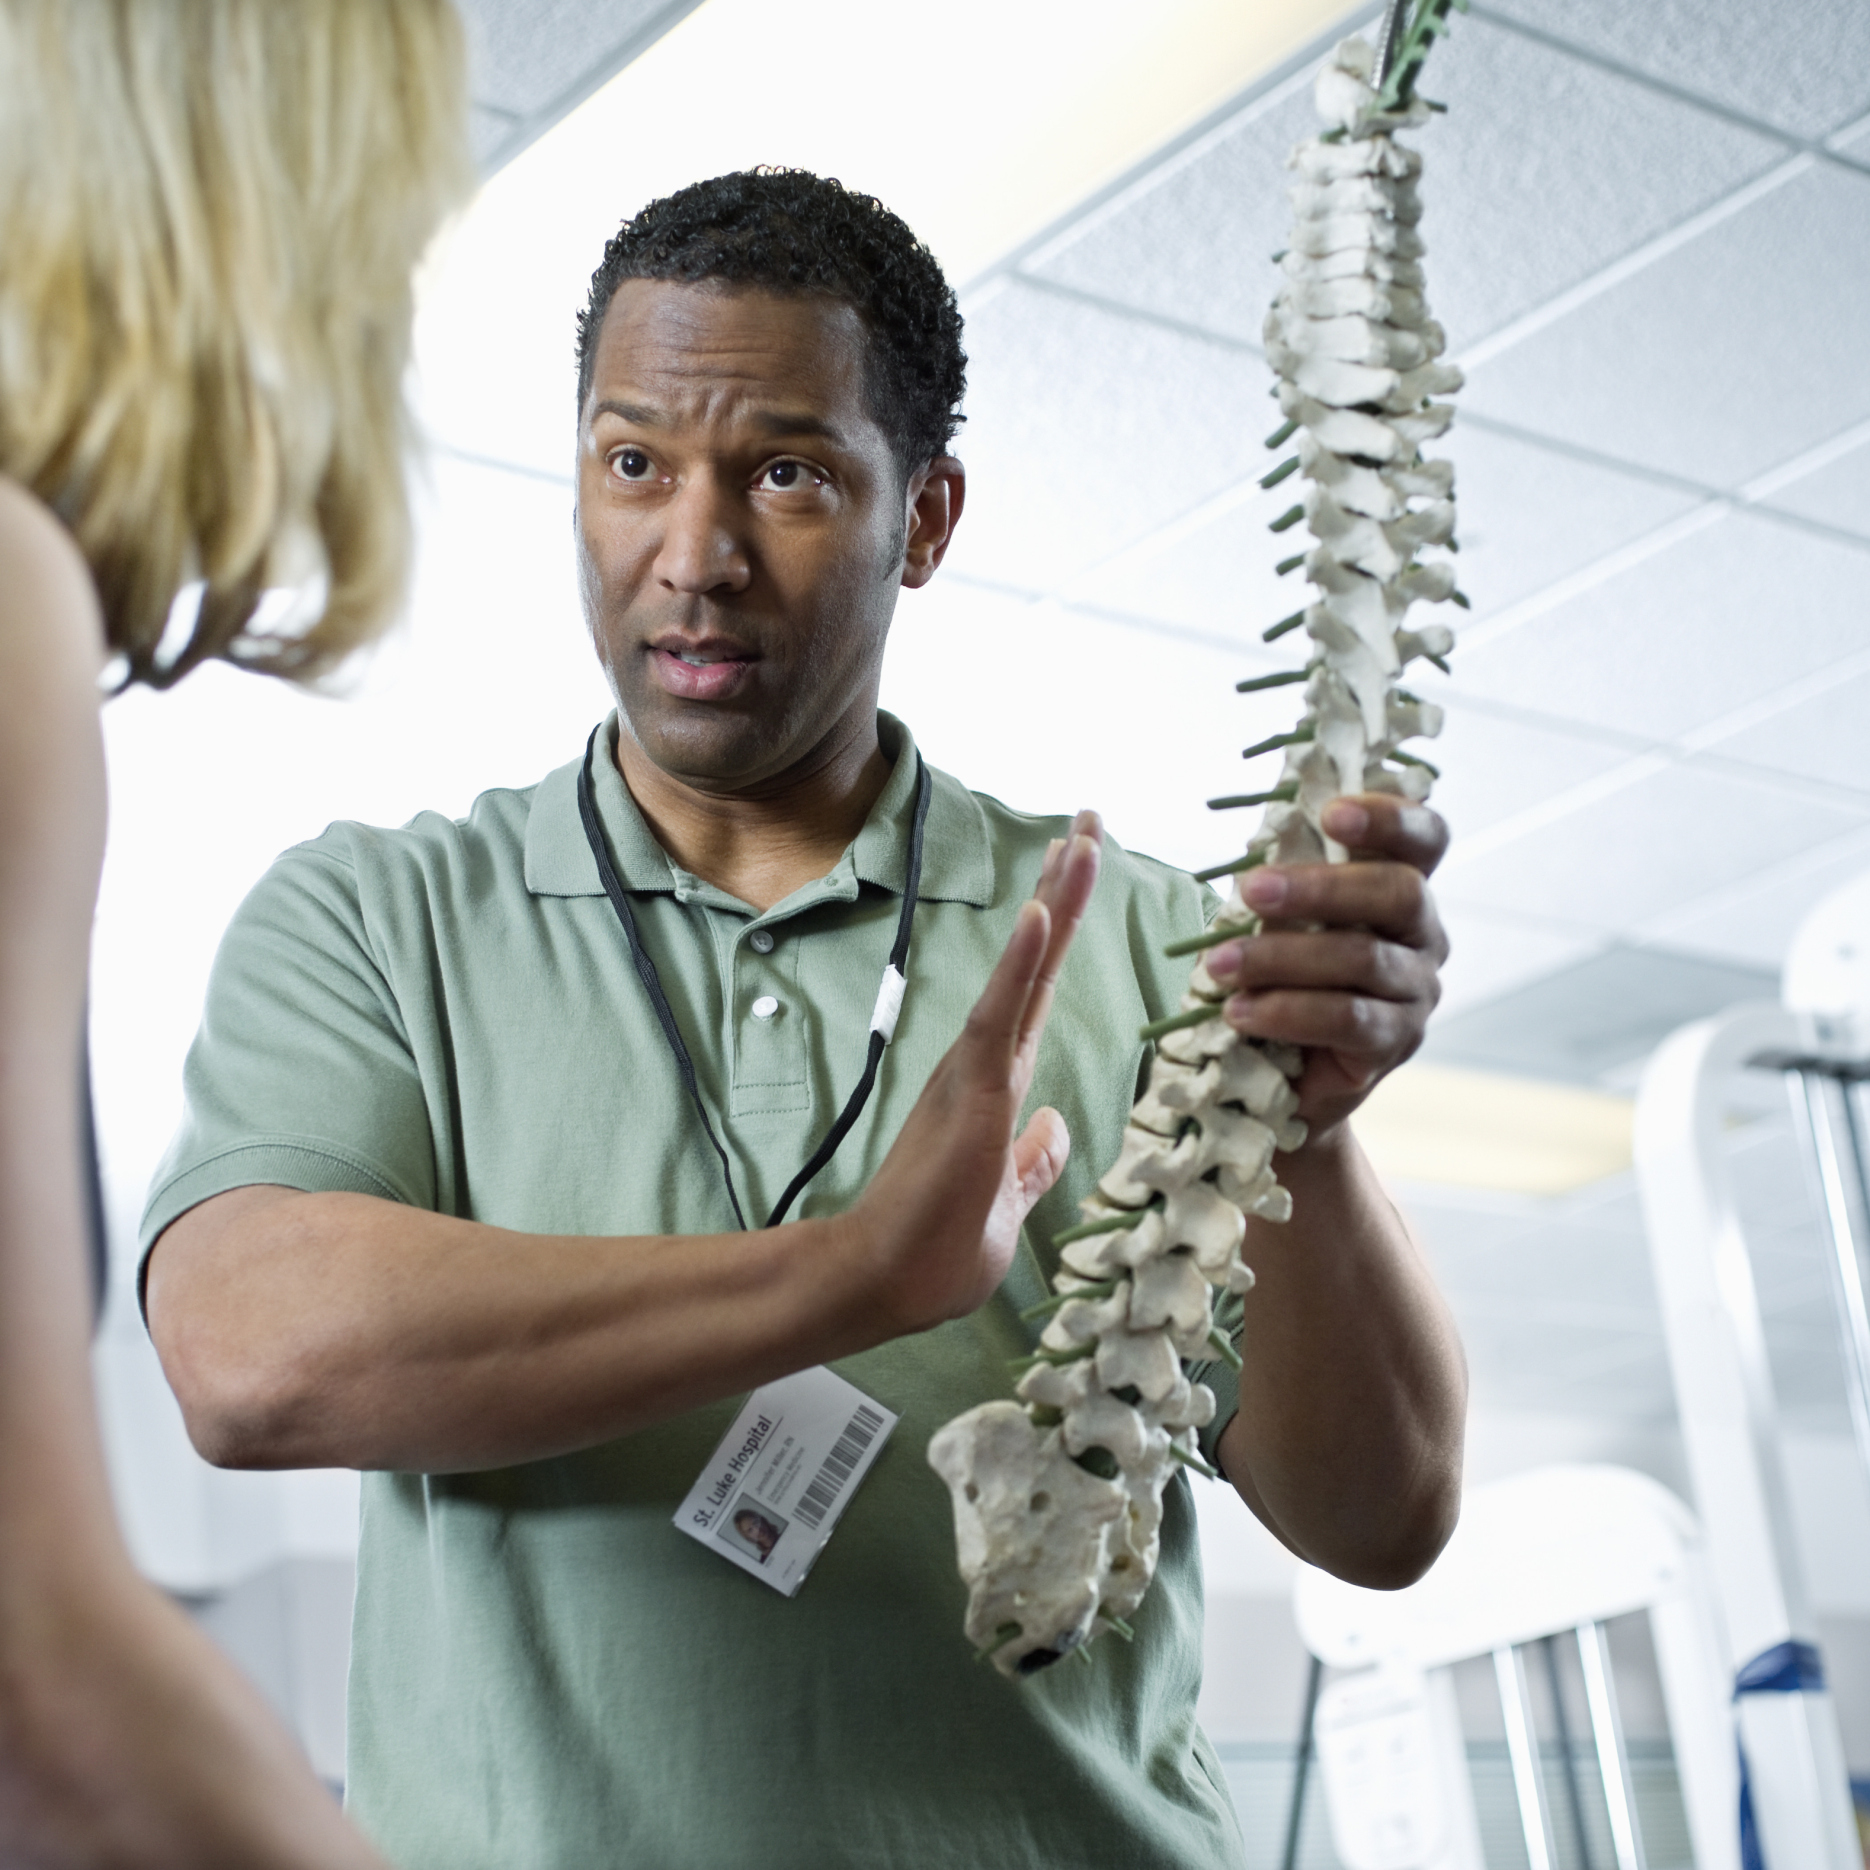 Therapists at Carolina Physical Therapy can help you understand and treat your low back pain spinal stenosis.